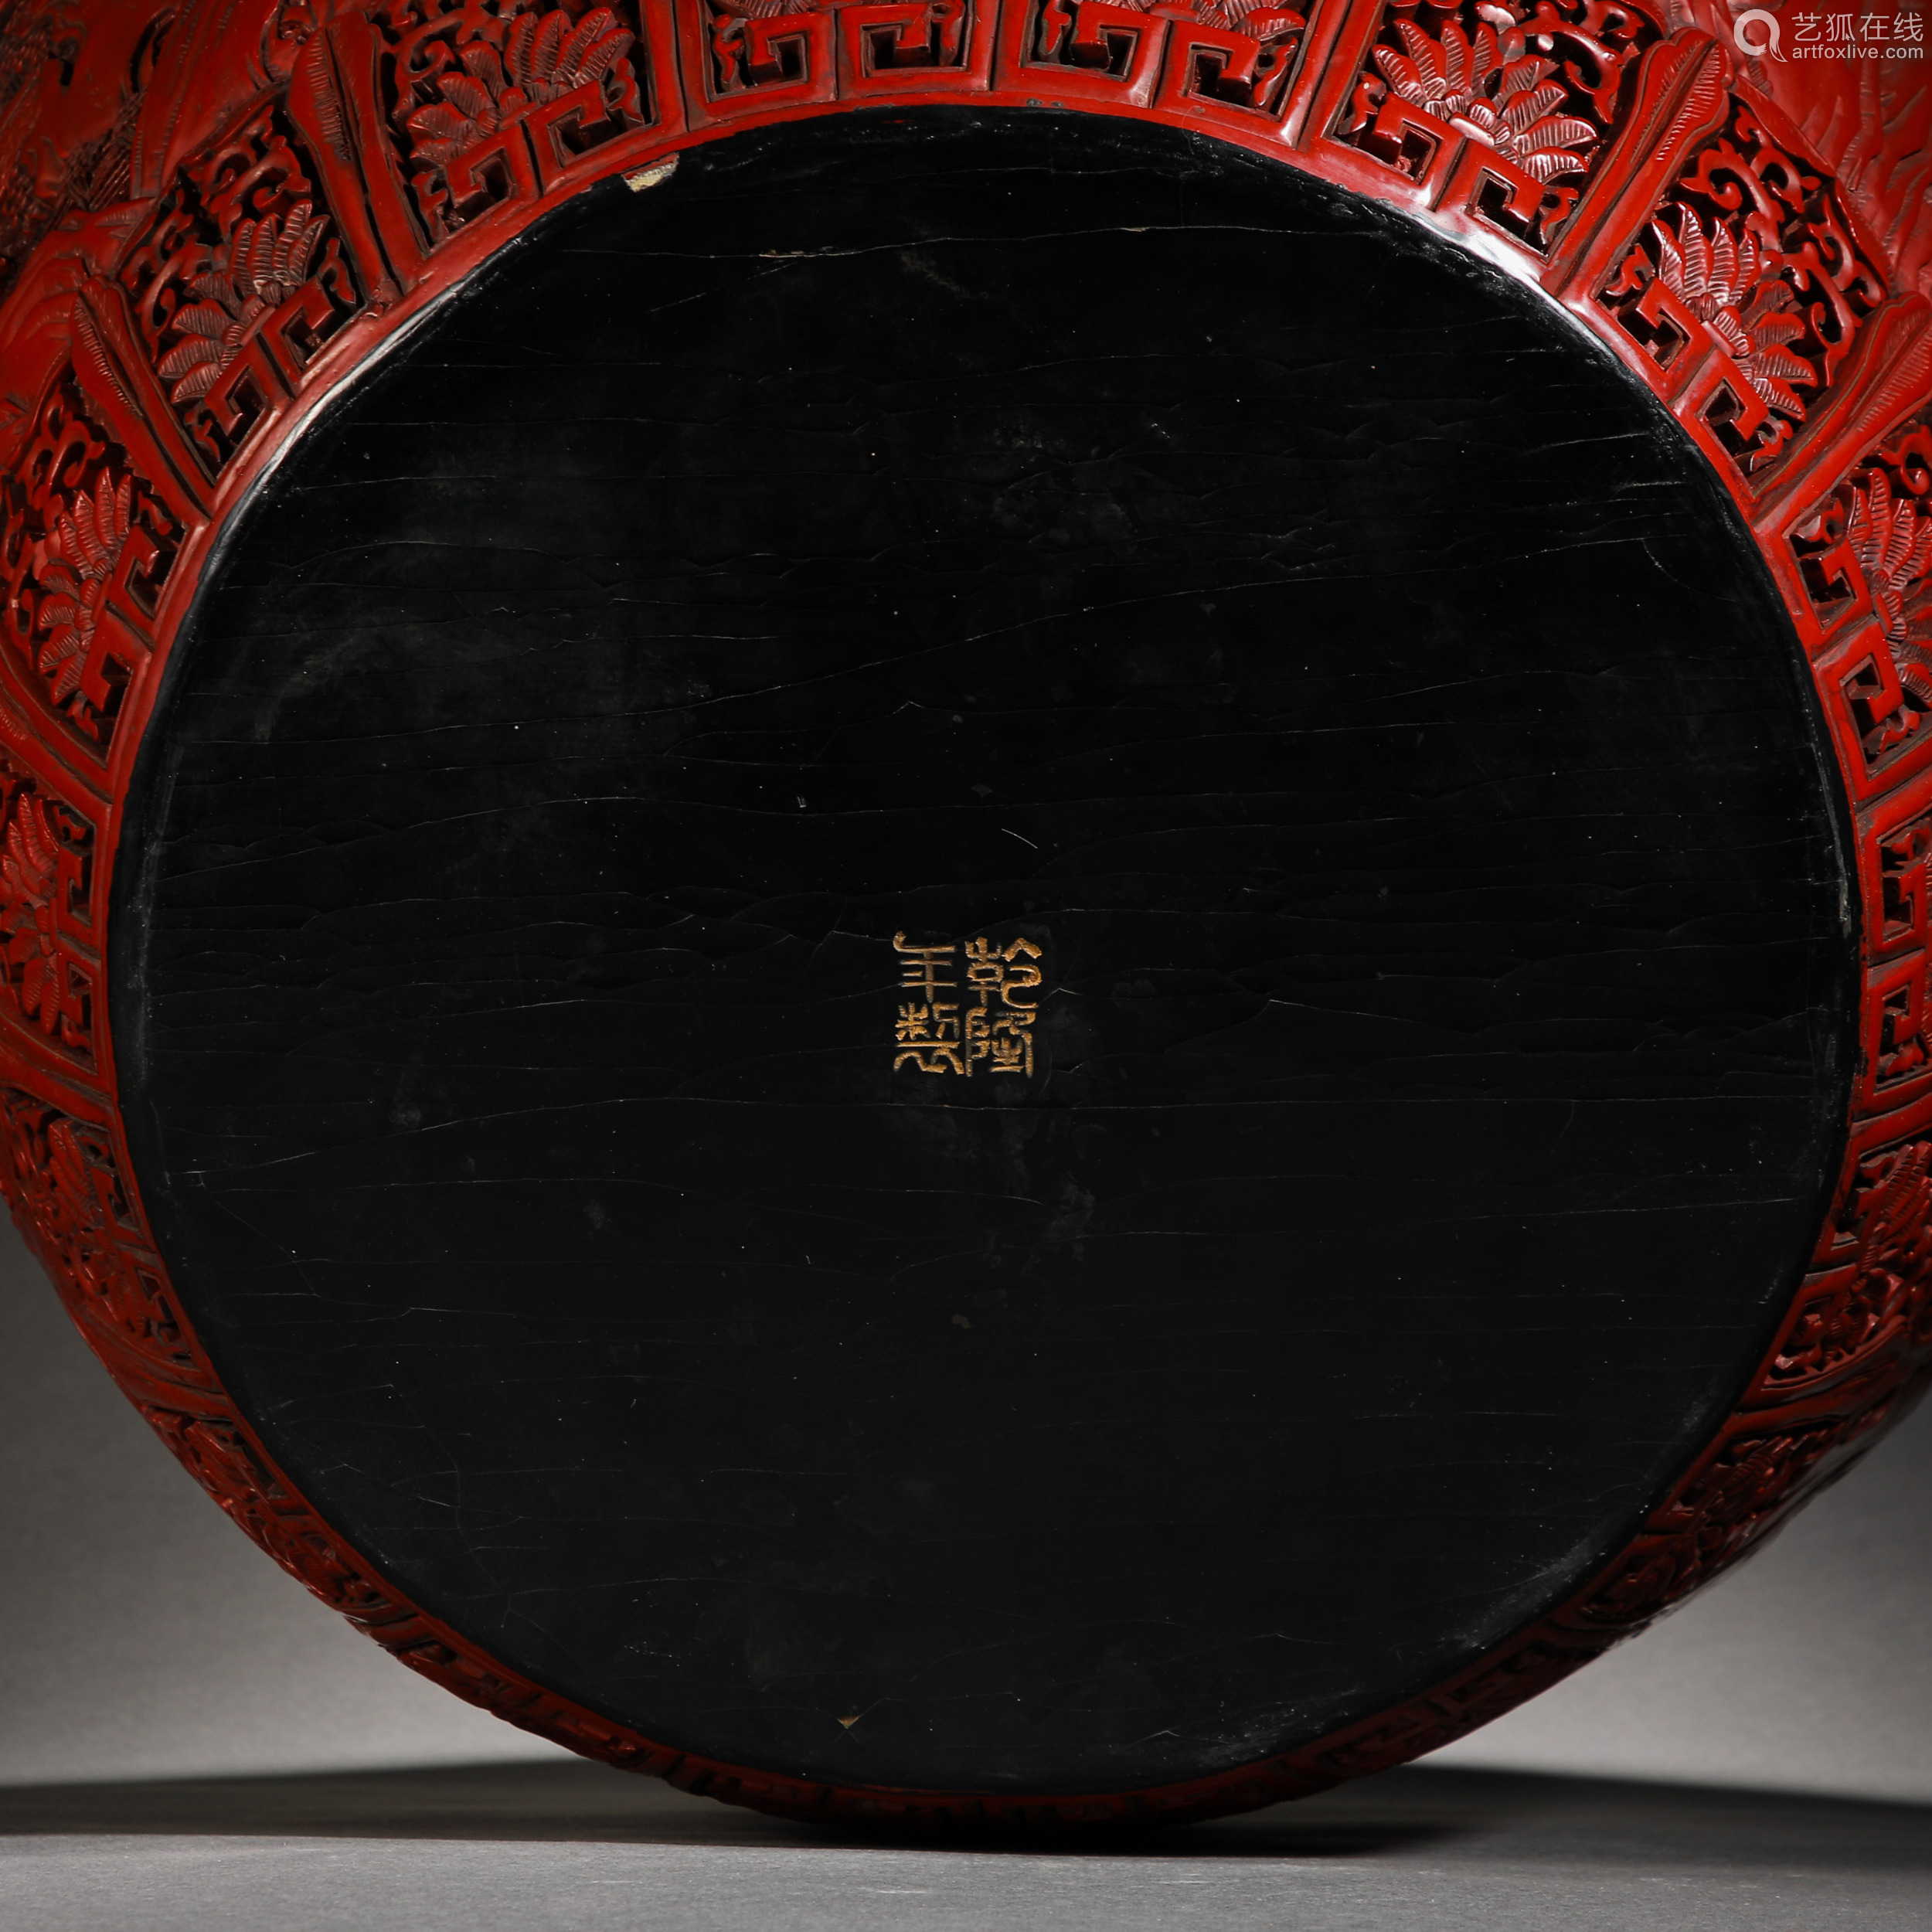 Qing dynasty red tinted large jar with flower pattern